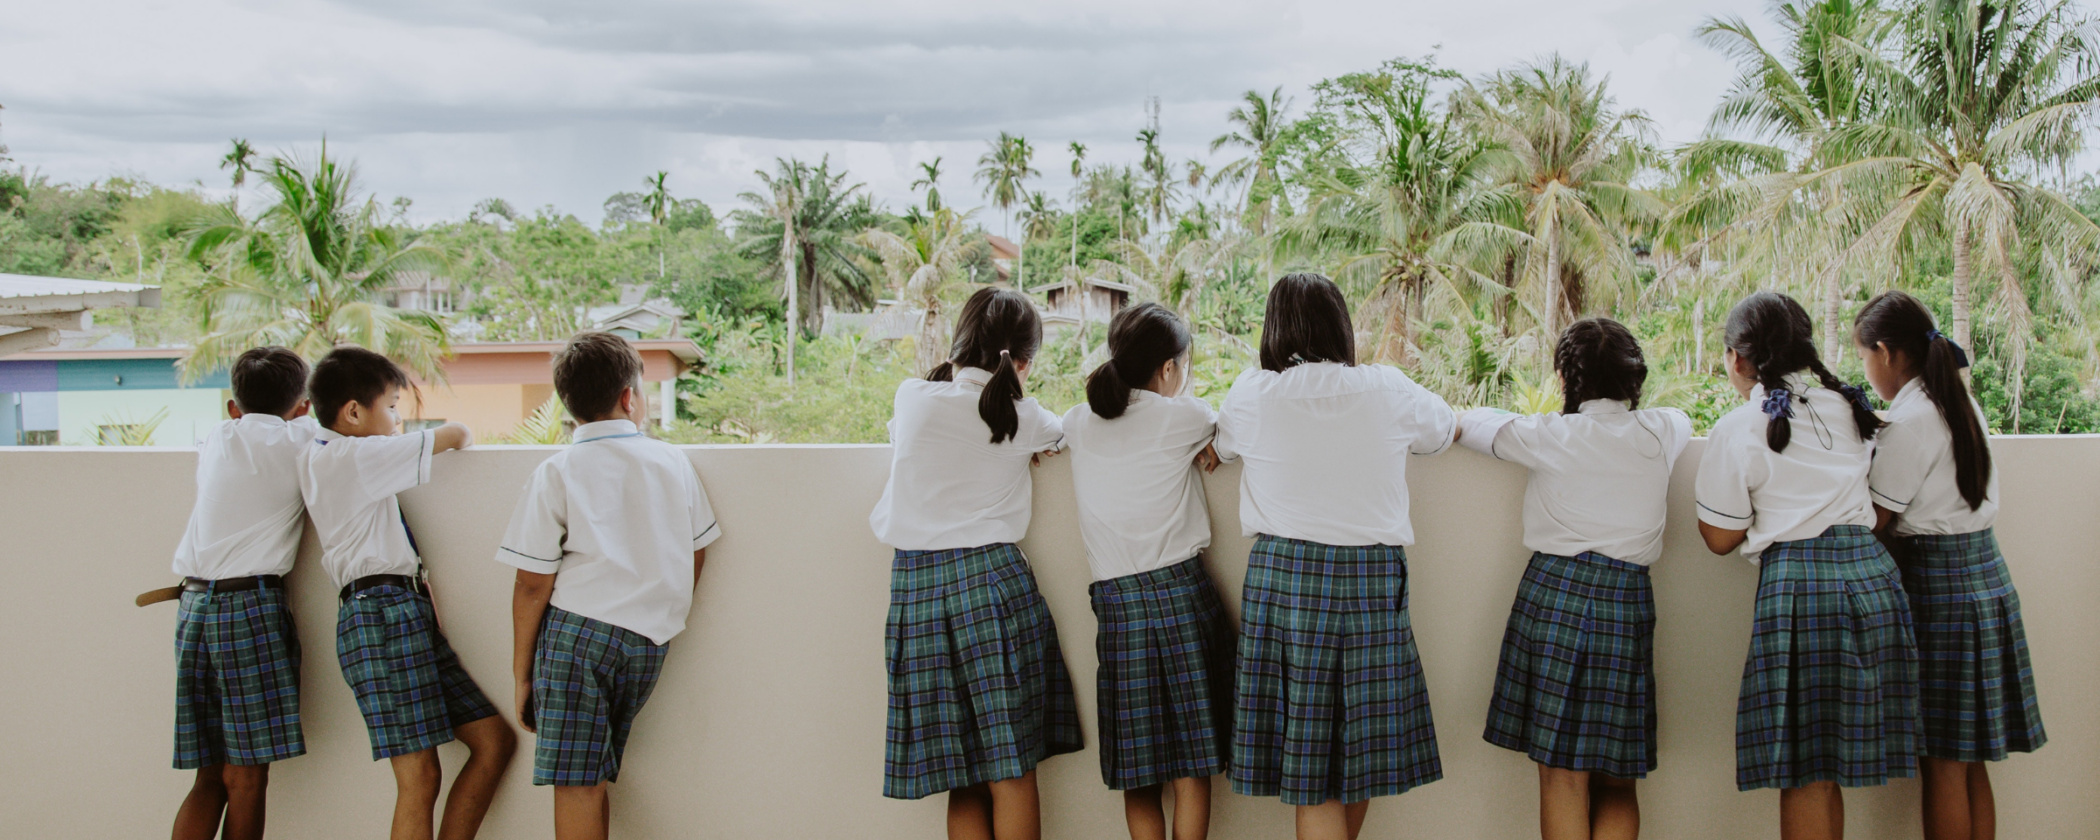 children dressed in school attire, with their backs to the photo, staring out from a balcony into a scenery with palm trees